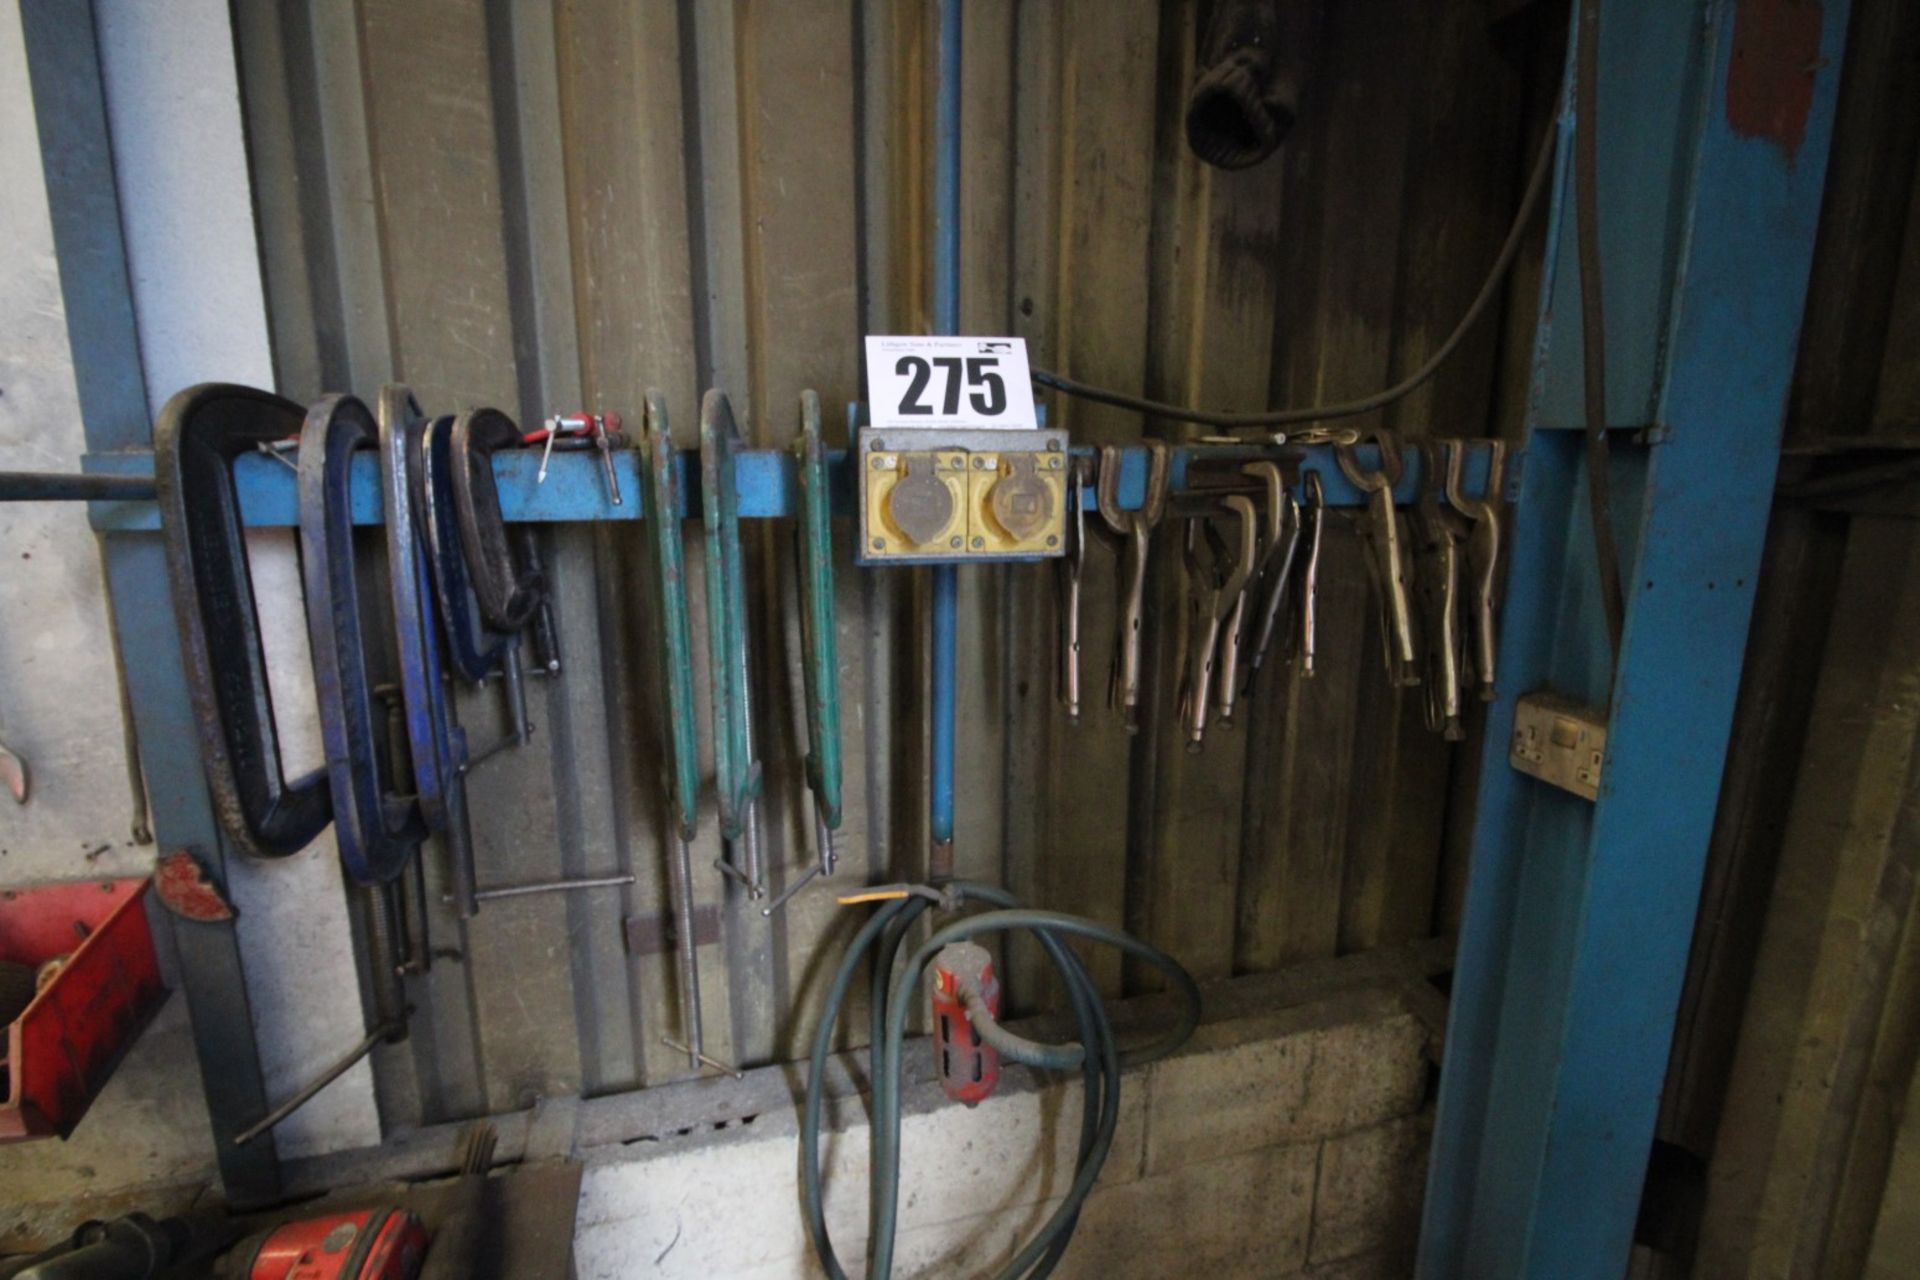 CONTENTS ON WALL OF 7 G-CLAMPS & APPROX. 9 WELDING CLAMPS